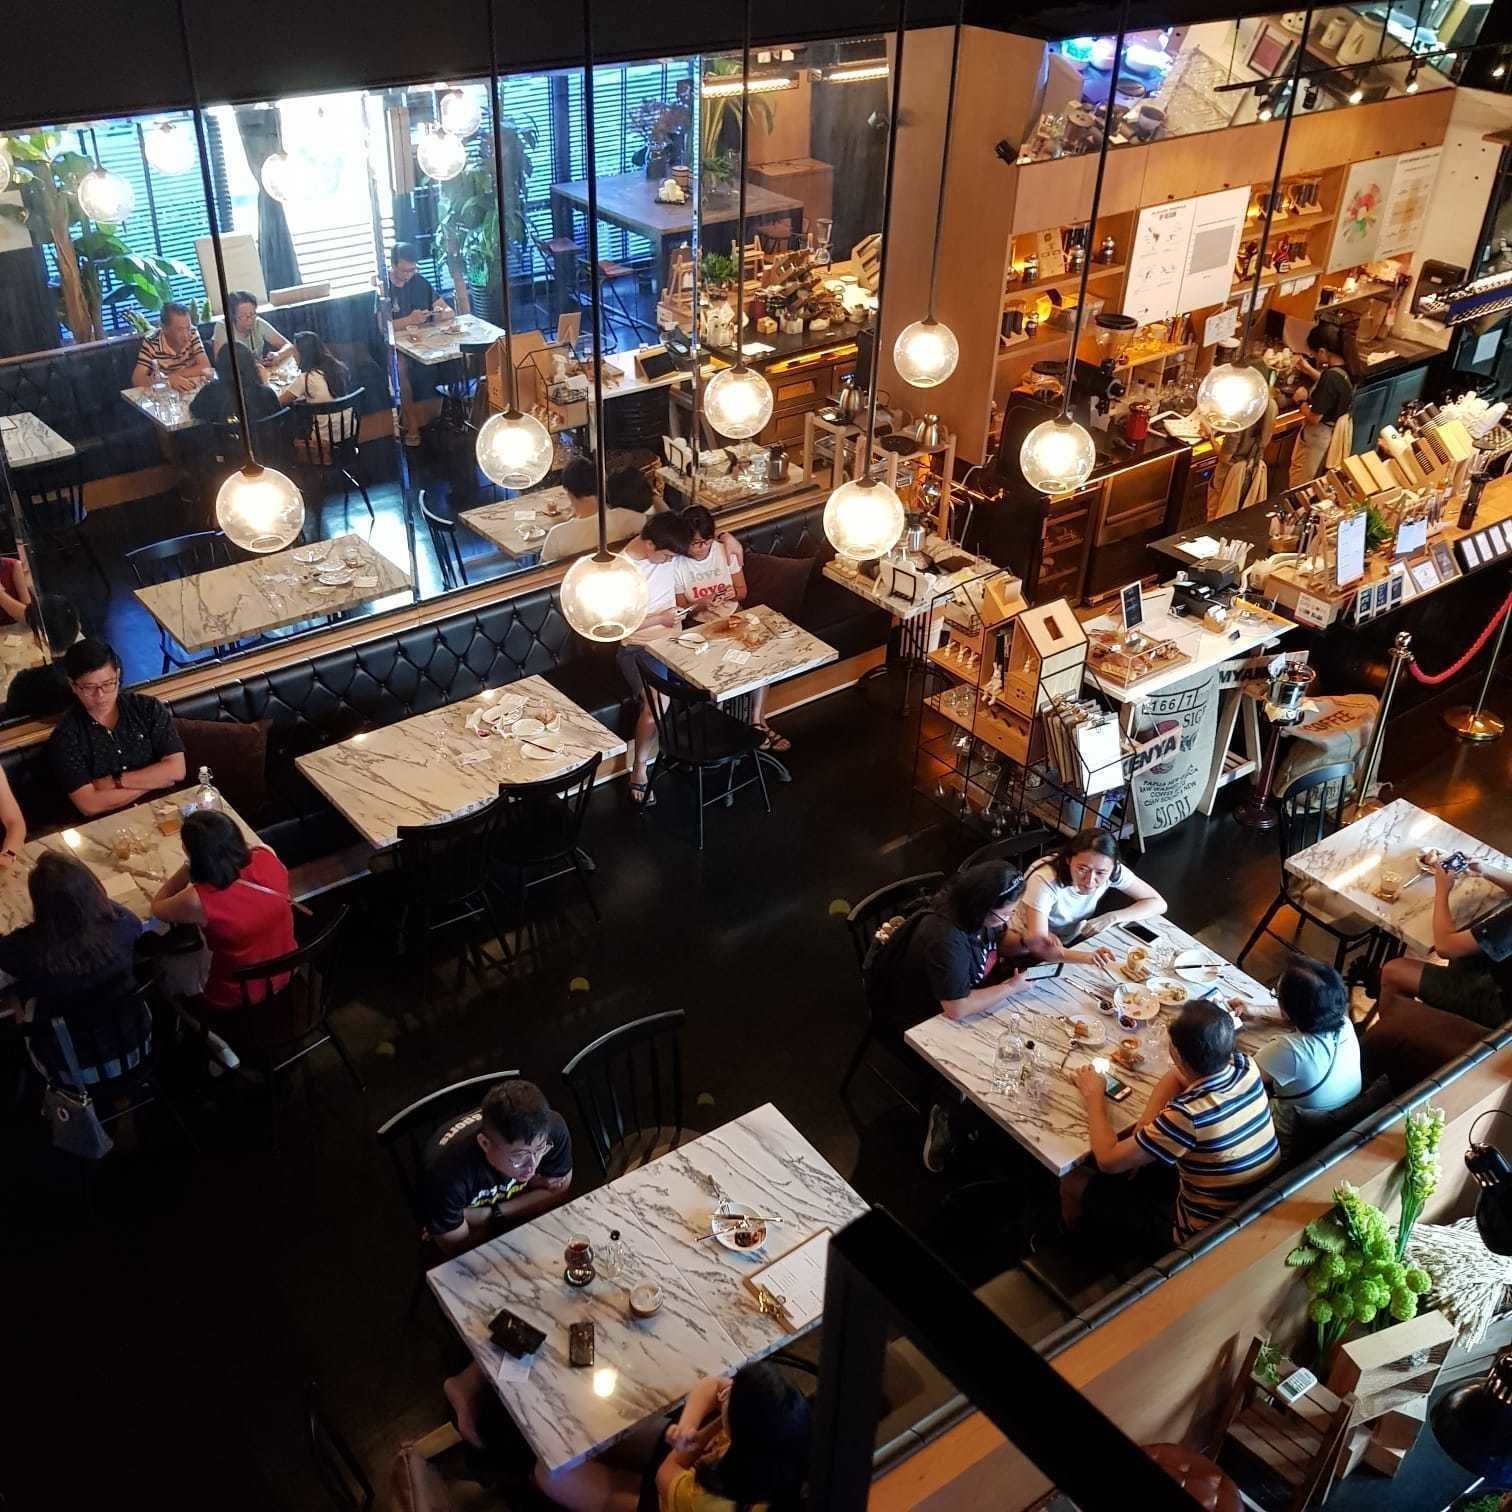 <span class="translation_missing" title="translation missing: en.meta.location_title, location_name: 20grams Coffee &amp; Roastery, city: Singapore">Location Title</span>